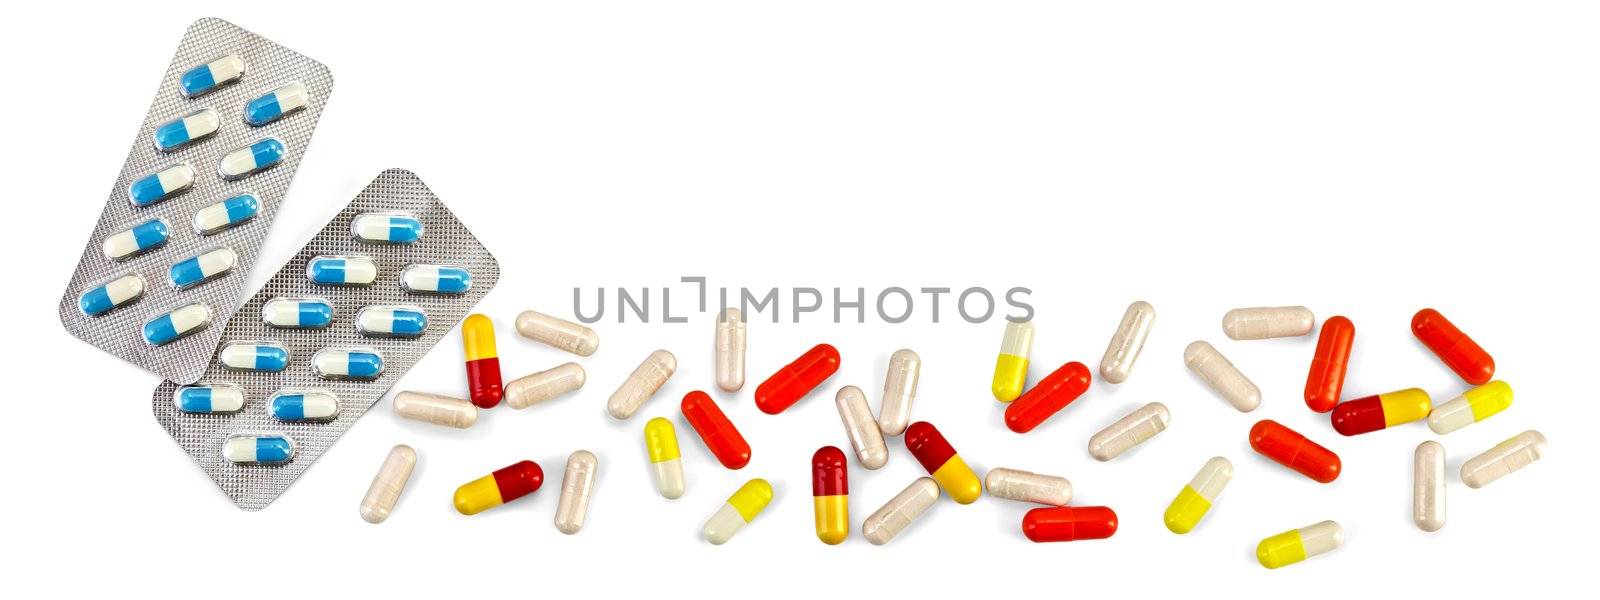 Blue capsules in two packs, capsules red, yellow and beige isolated on white background